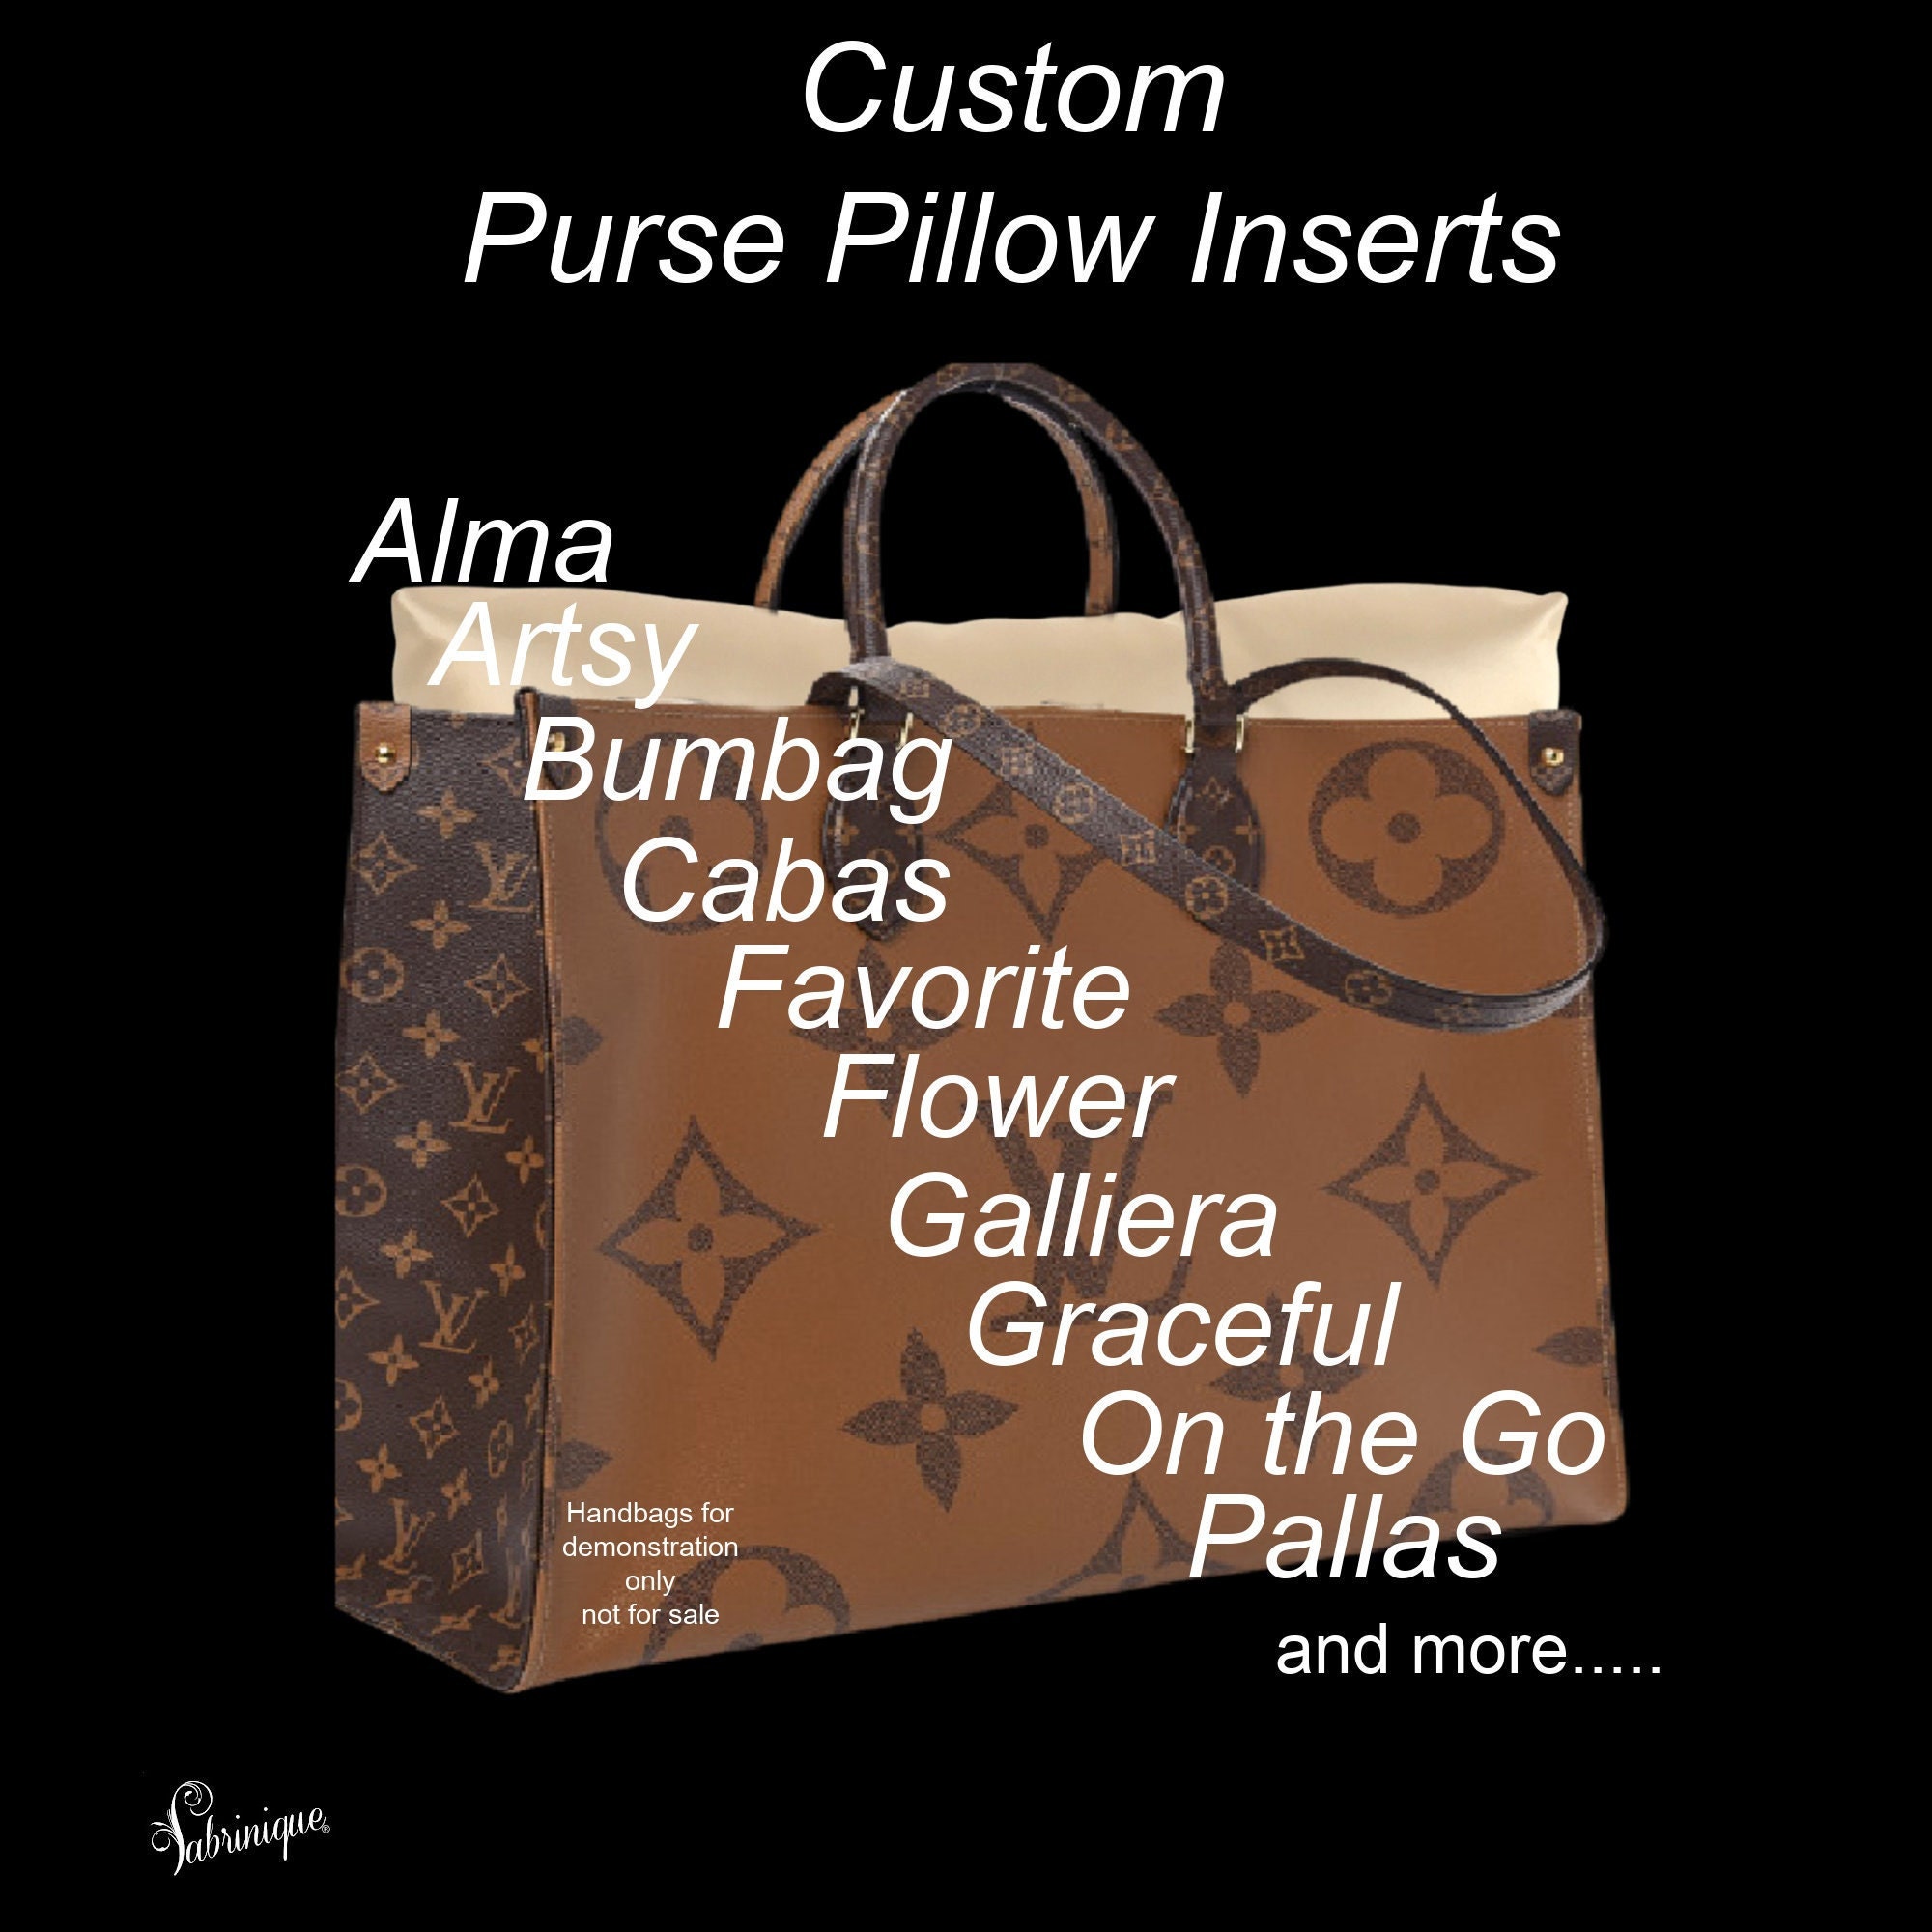 Custom Purse Pillow Inserts for LV HandbagsChristopher Backpack,  Bumbag,Flower and more! - Fabrinique